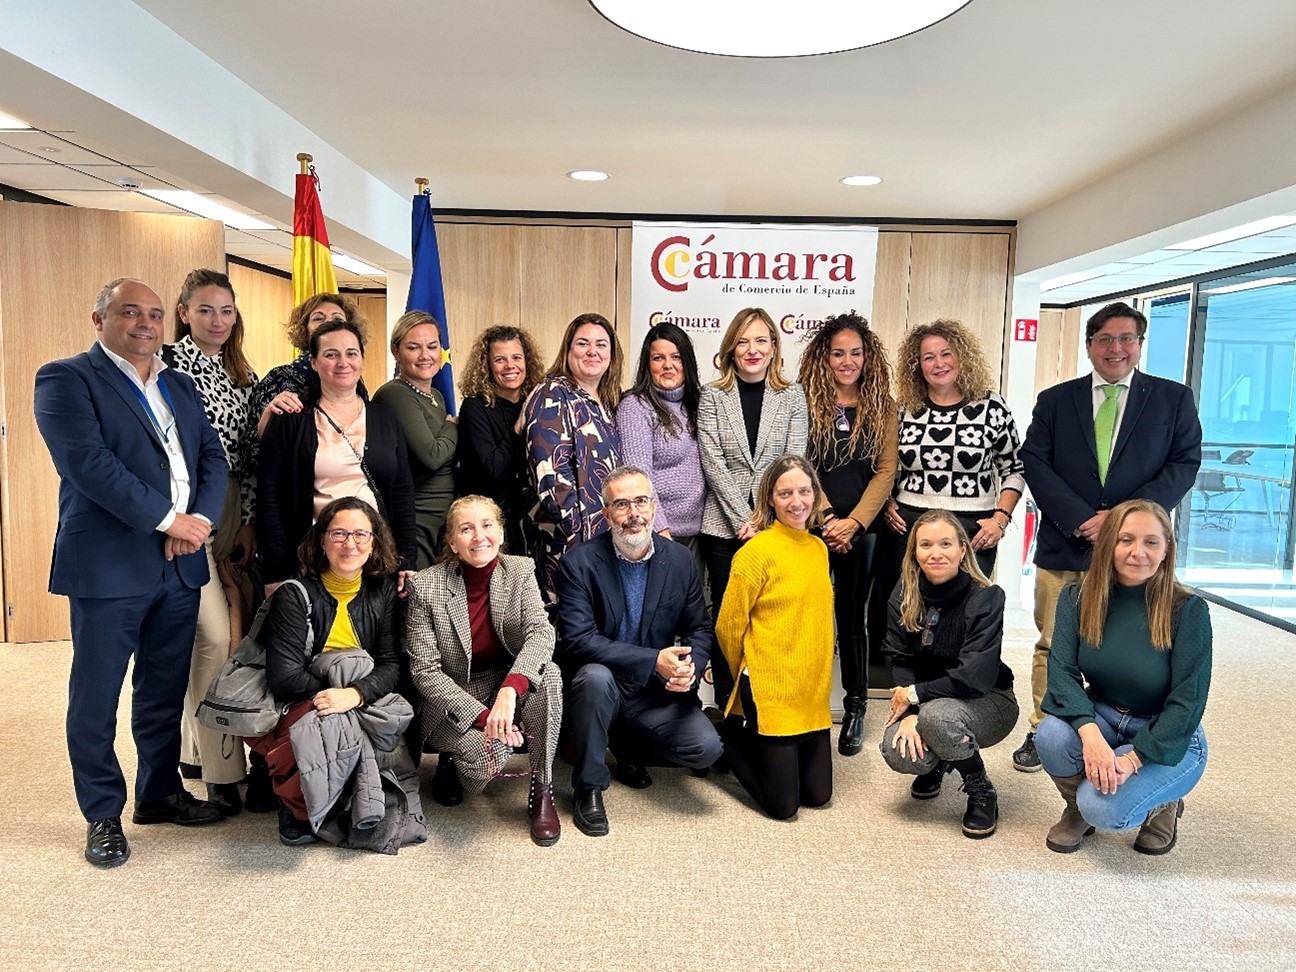 PROEXCA AND THE DELEGATION TO THE EU OF THE CHAMBER OF COMMERCE OF SPAIN RECEIVE 11 BUSINESSWOMEN AND MANAGERS FROM FUERTEVENTURA